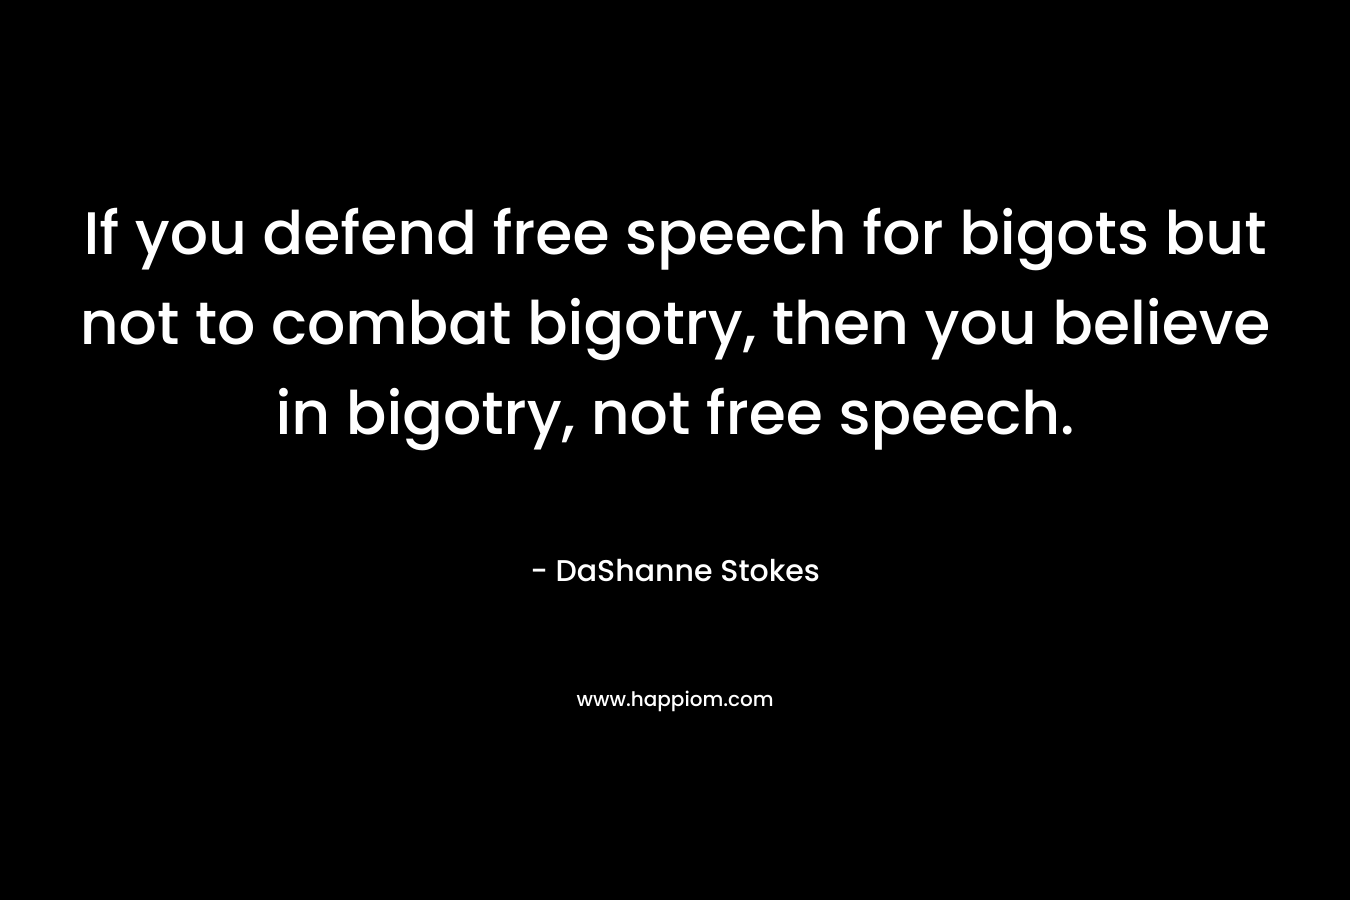 If you defend free speech for bigots but not to combat bigotry, then you believe in bigotry, not free speech. – DaShanne Stokes